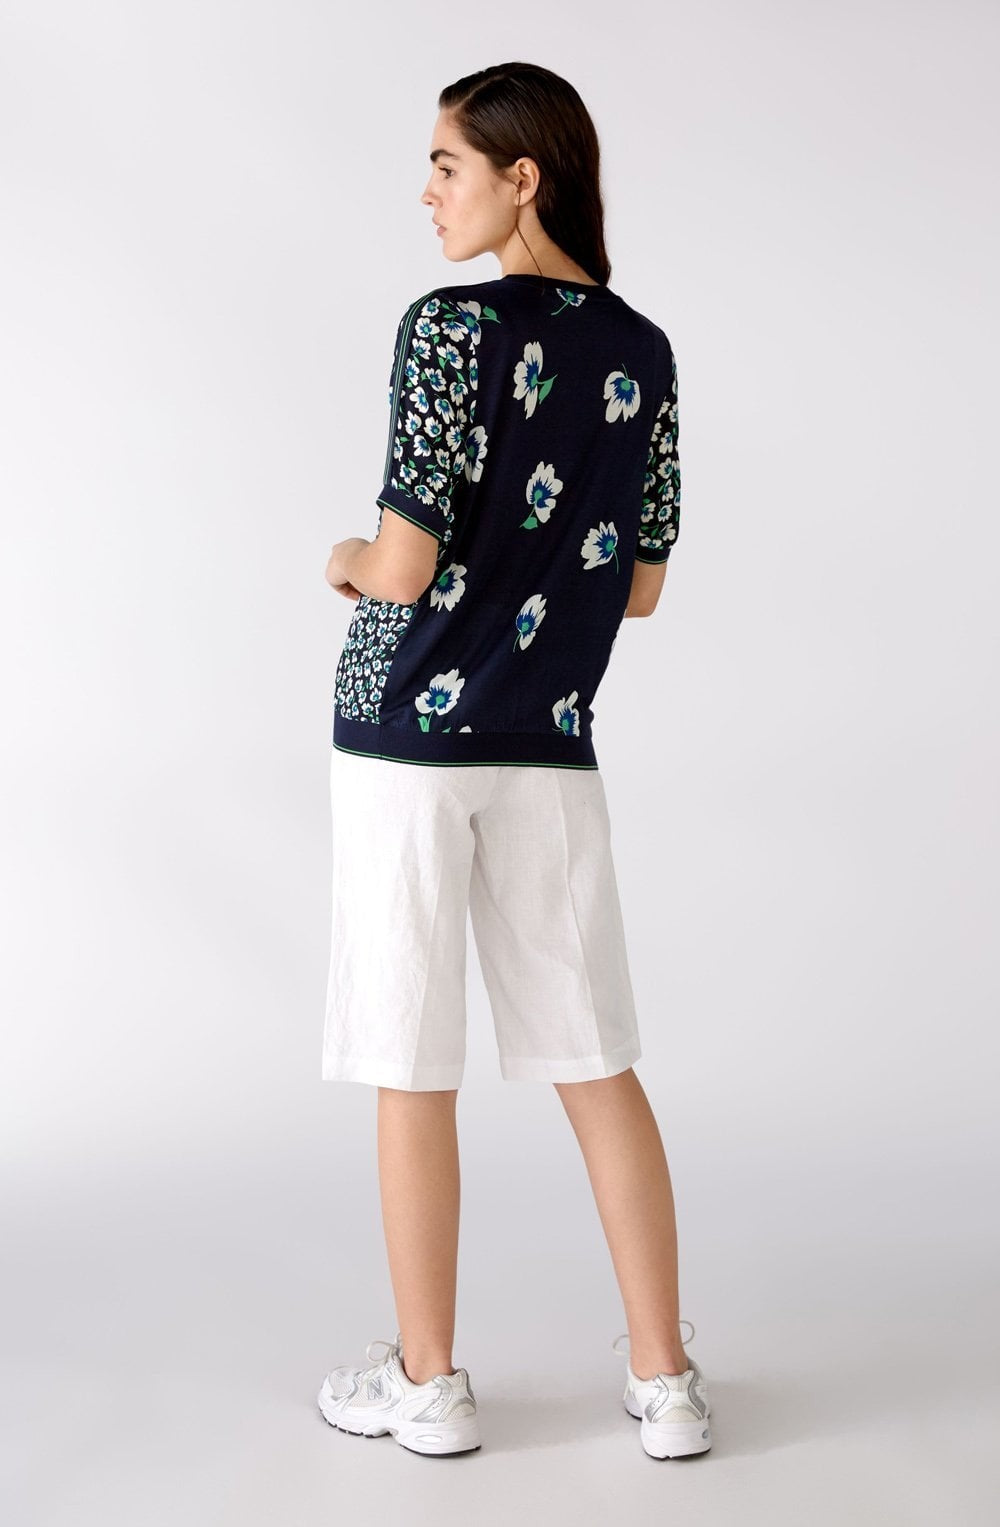 Oui Floral Navy T-Shirt